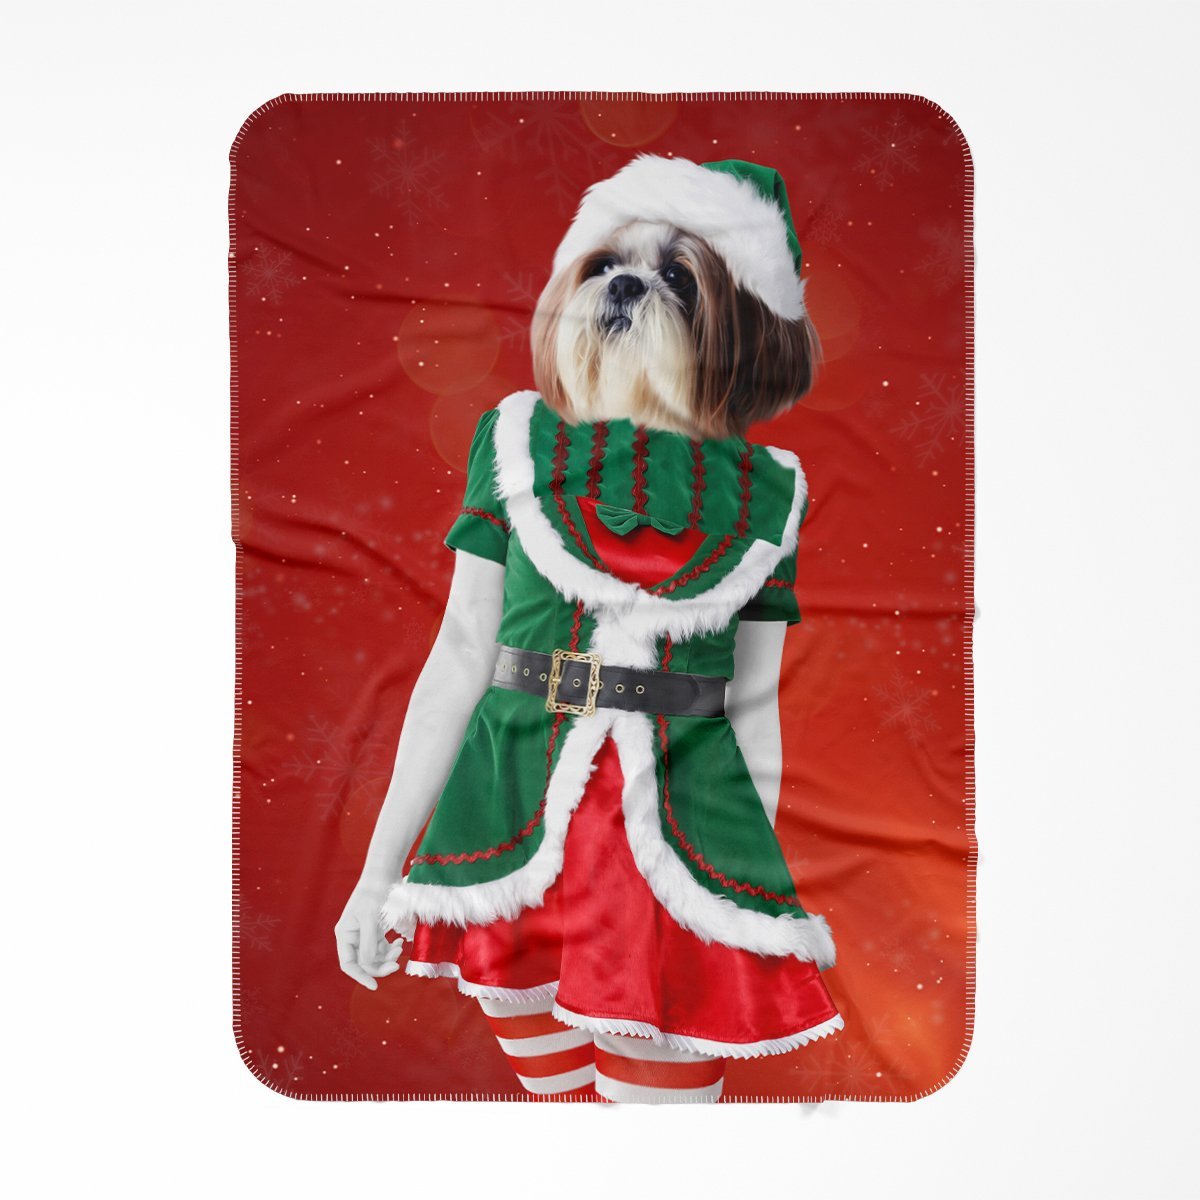 The Female Elf: Custom Pet Blanket - Paw & Glory - #pet portraits# - #dog portraits# - #pet portraits uk#Pawandglory, Pet art blanket,pet fleece blanket, super soft dog blanket, blanket of your dog, blankets with dog pictures on them, dog blanket cheap